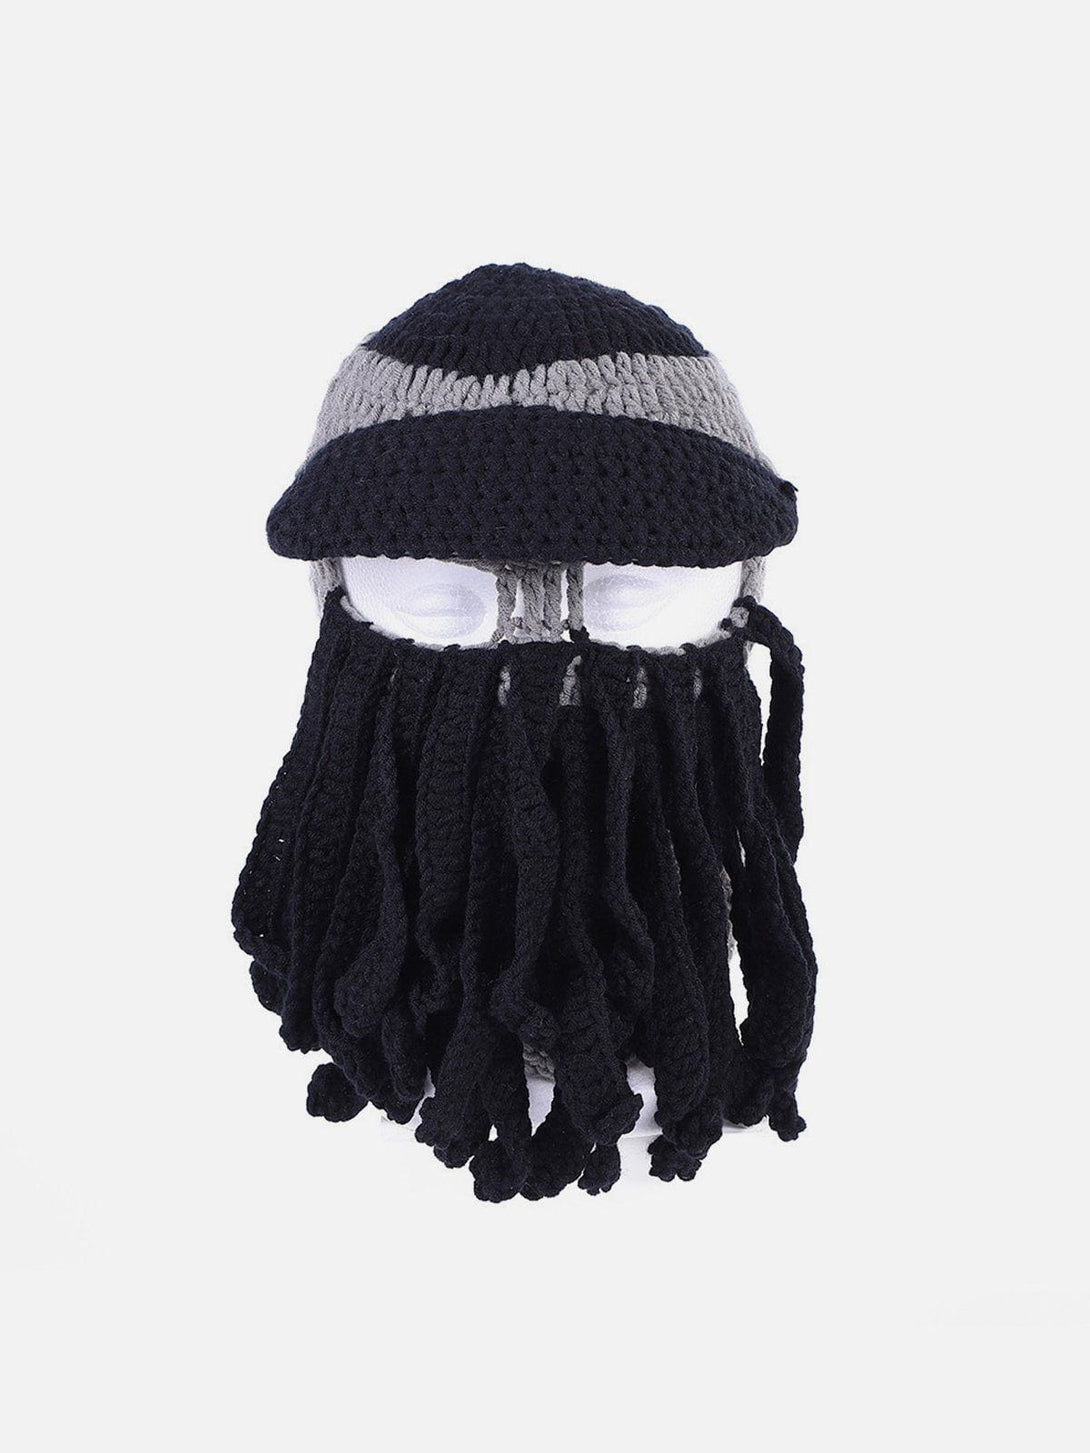 Levefly - Funny Knit Masked Octopus Hat - Streetwear Fashion - levefly.com